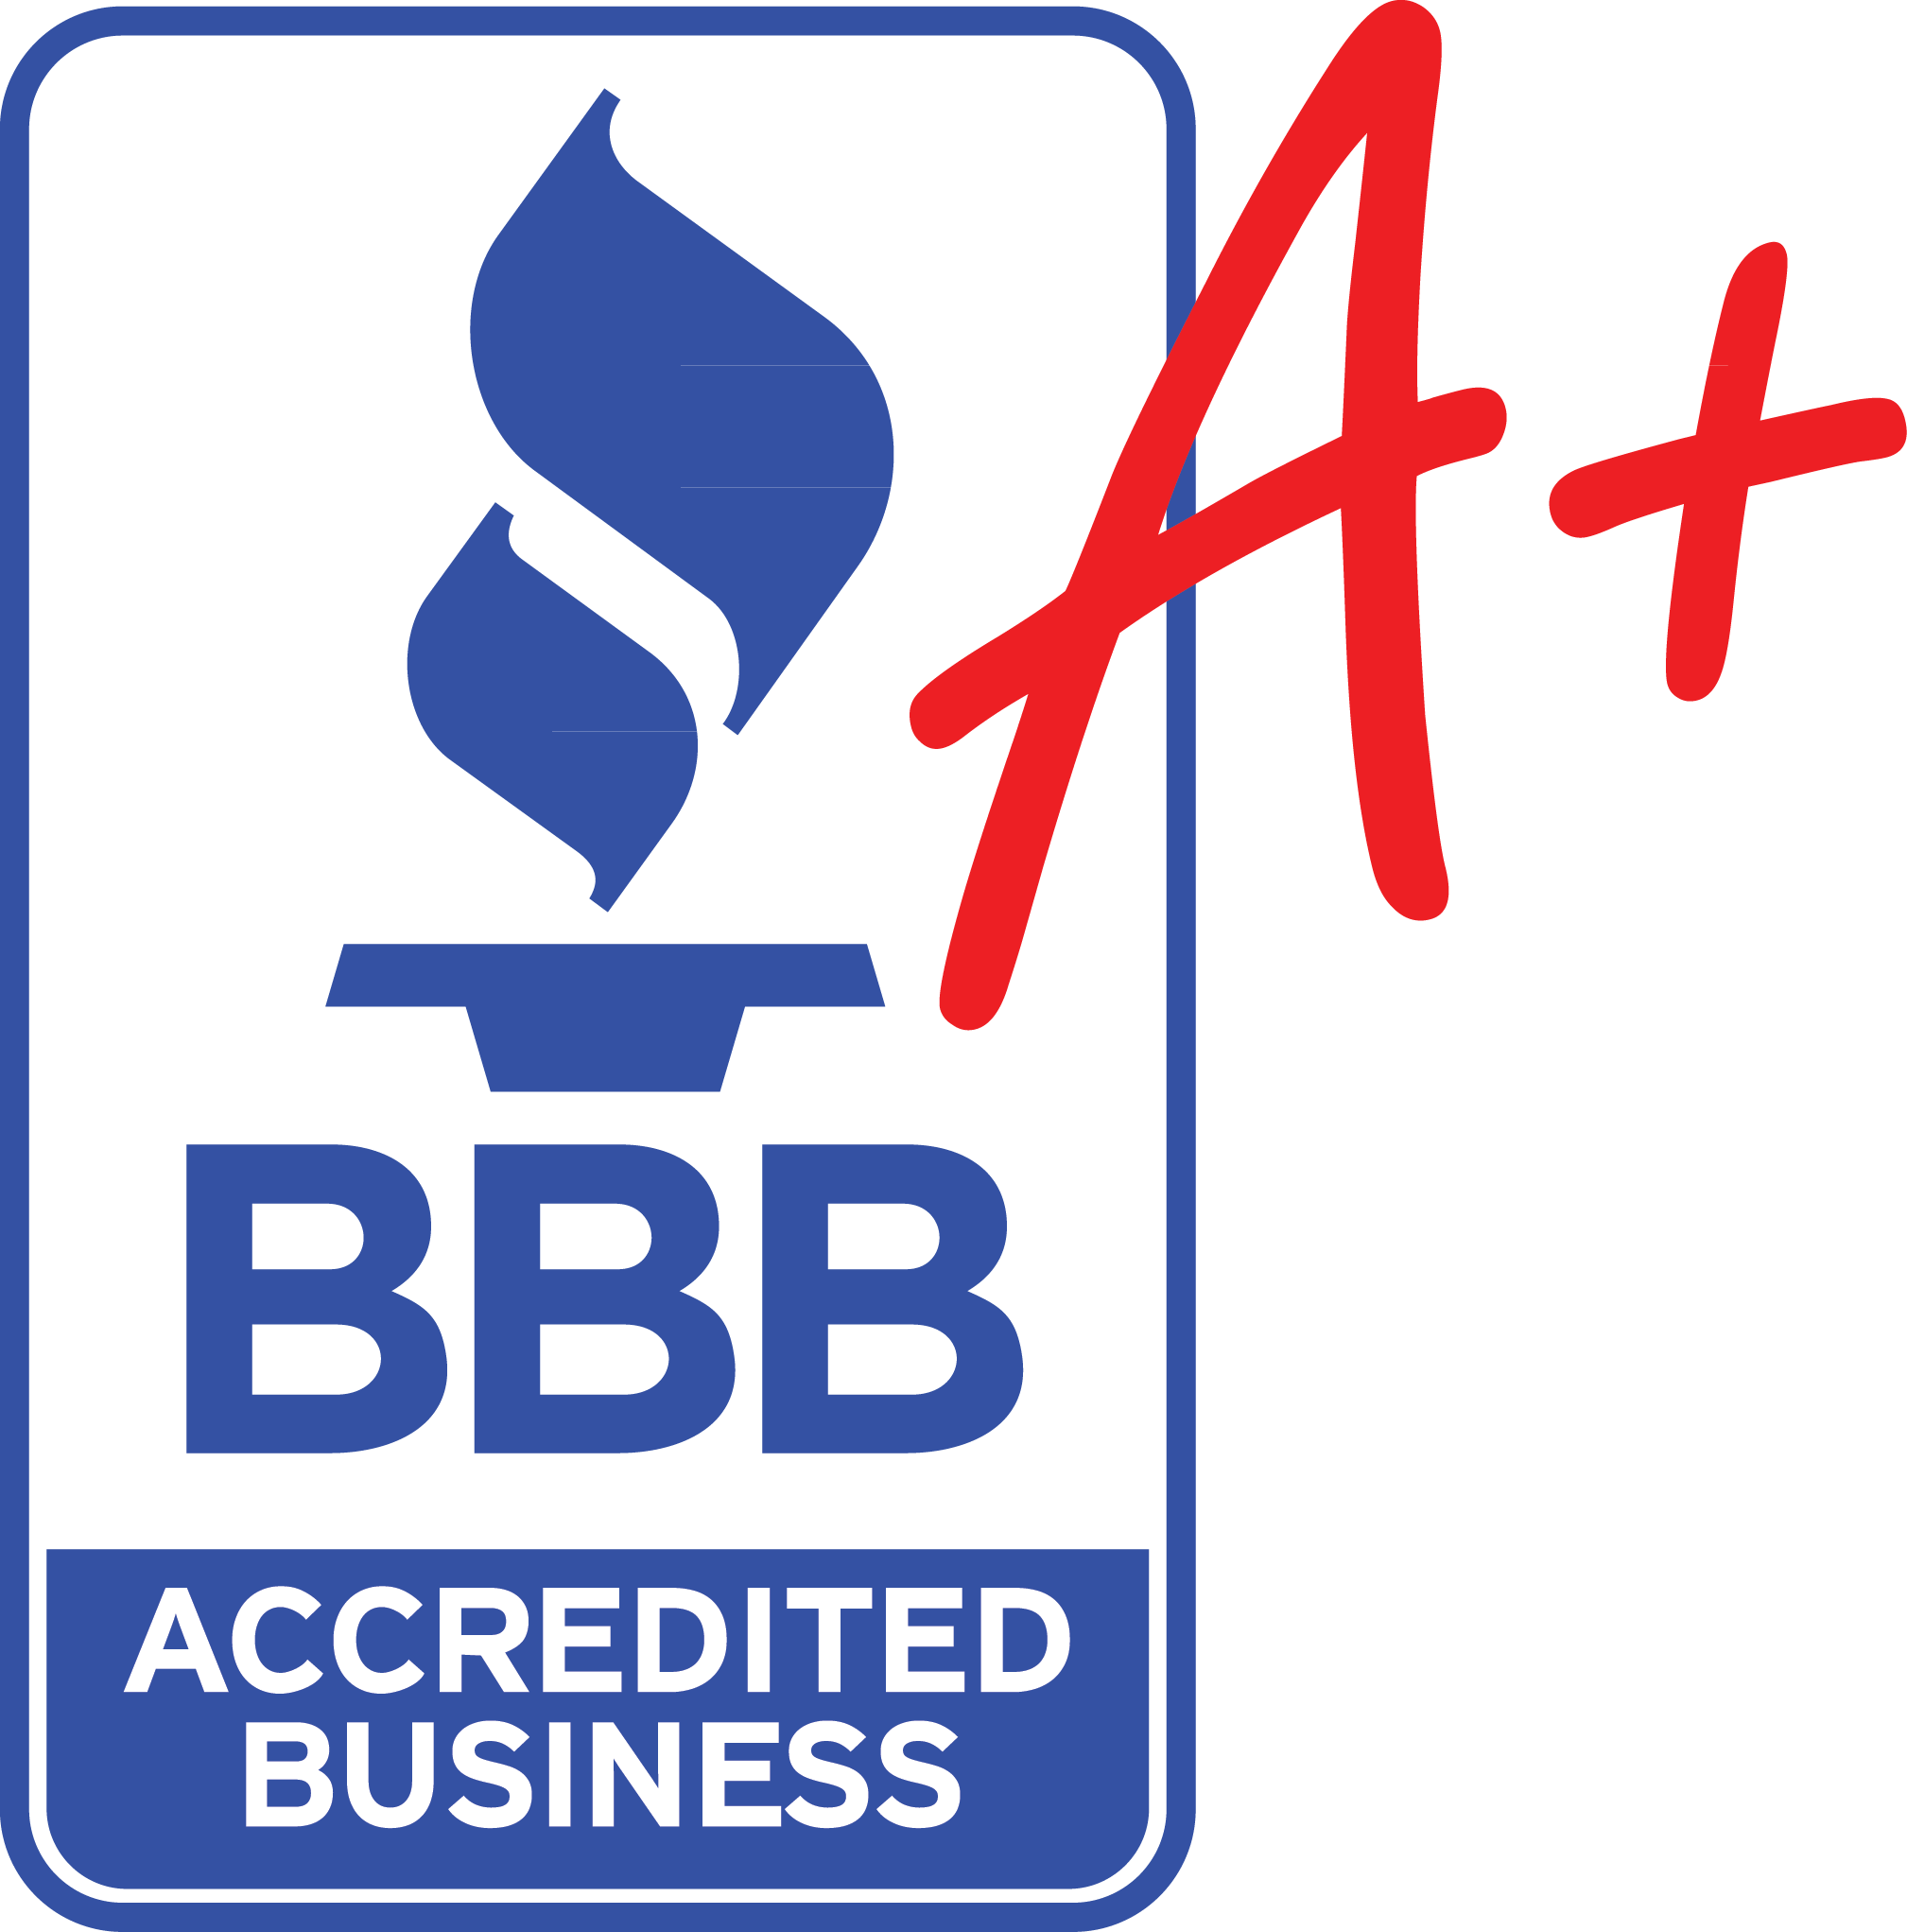 BBB Accredited Business Logo - Why Choose a BBB Accredited Car Service? | Professional Livery